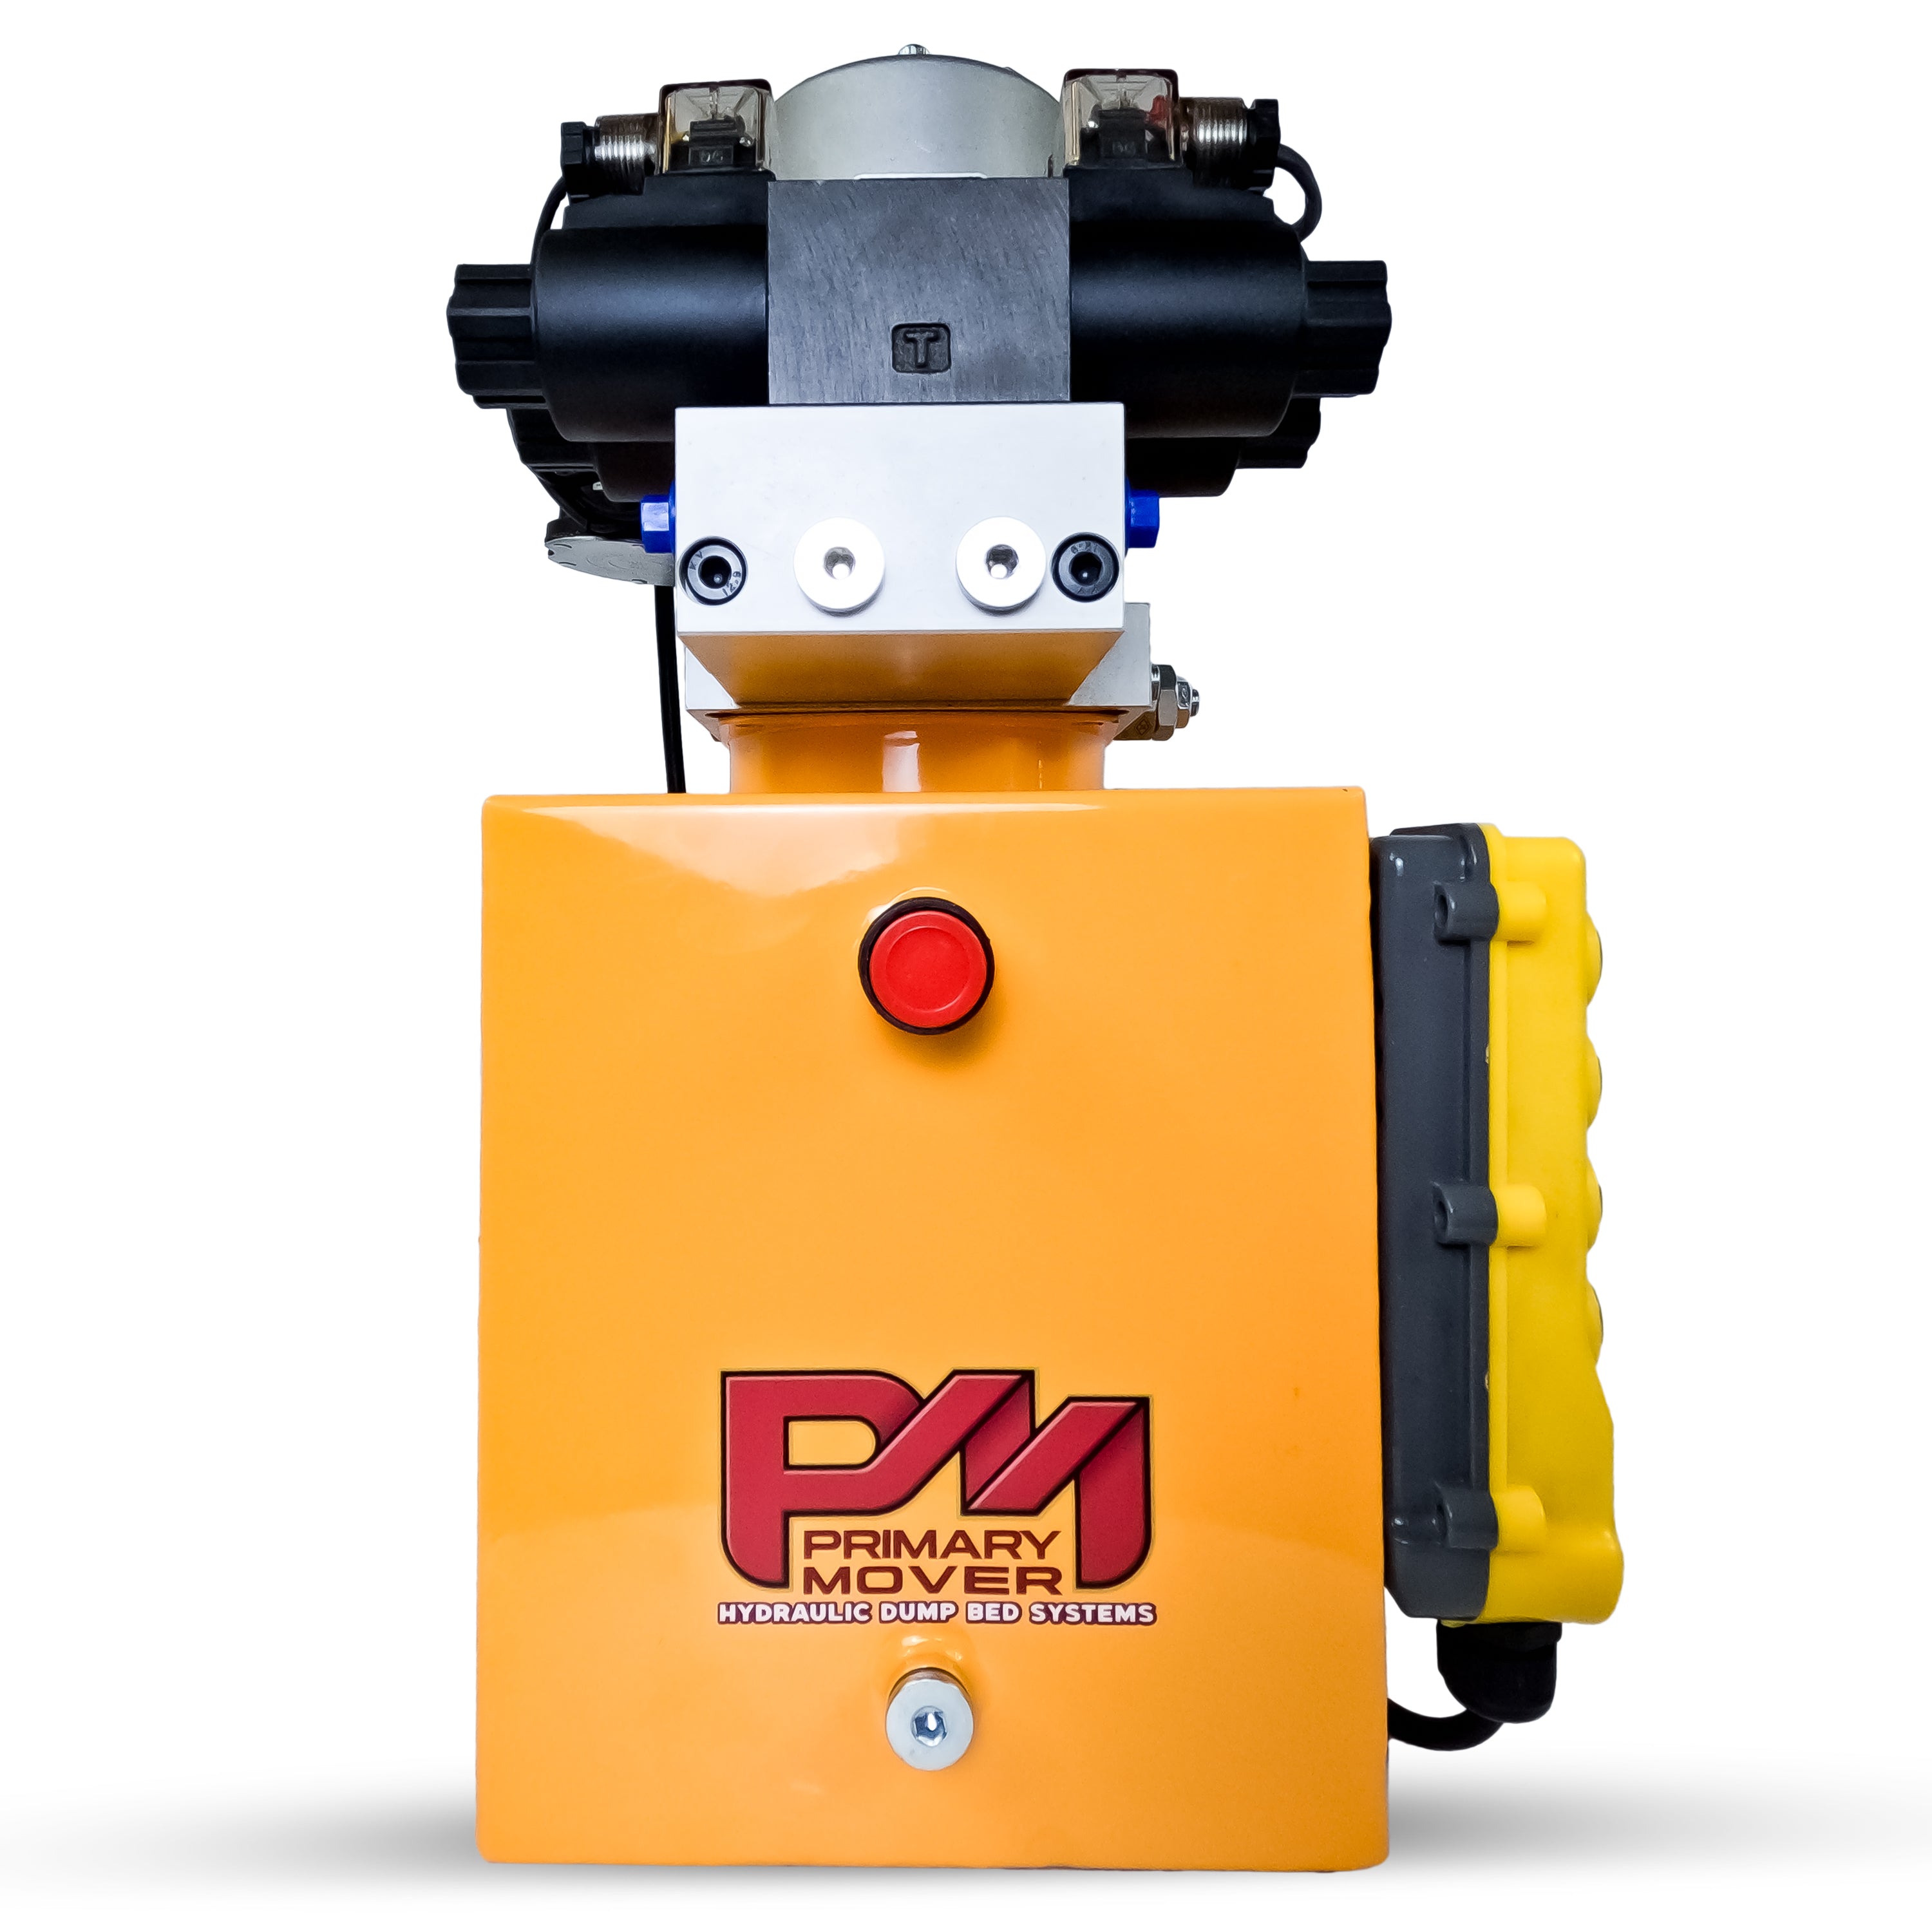 Compact Dual Double Hydraulic Power Unit from PrimaryMover.com: A versatile machine with quad power capability for dump trailers and trucks, ensuring efficient hydraulic operations with precision and ease. Used for any truck or trailer application. 1/2 